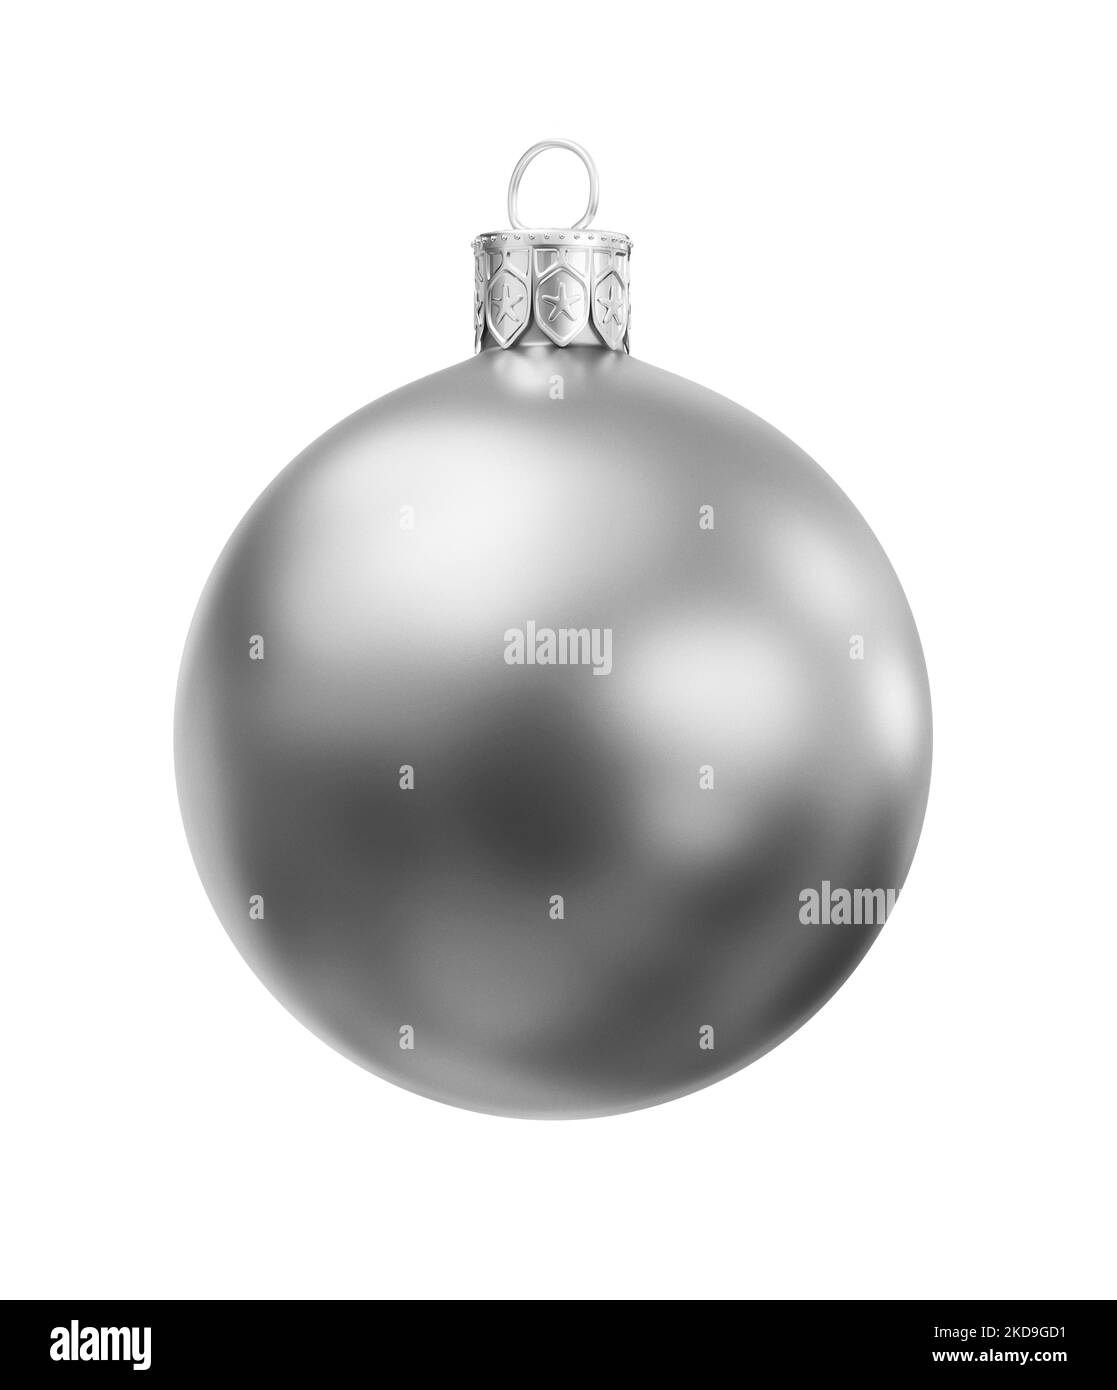 Xmas ball pink shiny decor, Happy New Year bauble sparkling, wintertime decoration sphere hanging adornment modern traditional symbol isolated on whit Stock Photo